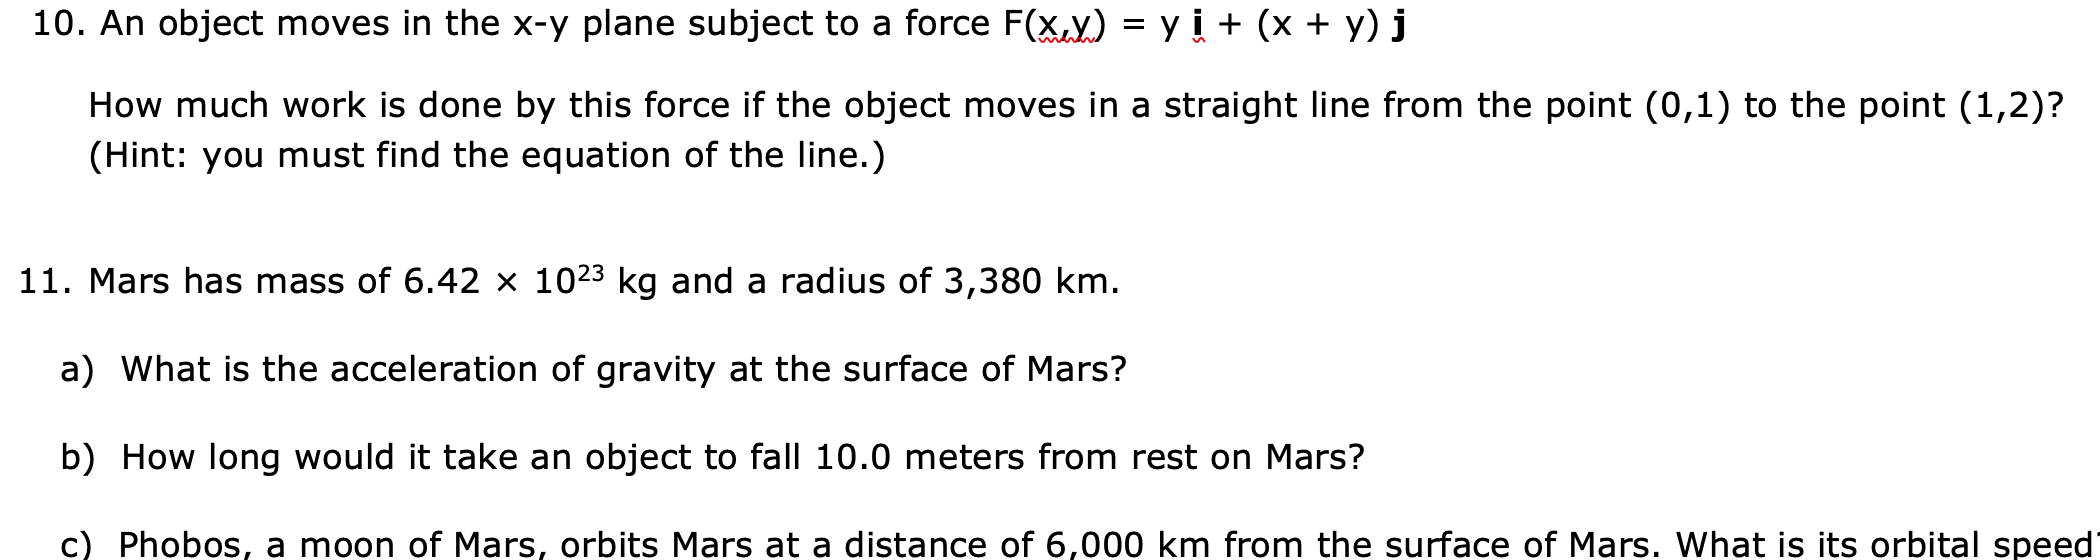 10. An object moves in the x-y plane subject to a force F(x.y) = y i + (x + y) j
How much work is done by this force if the object moves in a straight line from the point (0,1) to the point (1,2)?
(Hint: you must find the equation of the line.)
11. Mars has mass of 6.42 × 1023 kg and a radius of 3,380 km.
a) What is the acceleration of gravity at the surface of Mars?
b) How long would it take an object to fall 10.0 meters from rest on Mars?
c) Phobos, a moon of Mars, orbits Mars at a distance of 6,000 km from the surface of Mars. What is its orbital speed
